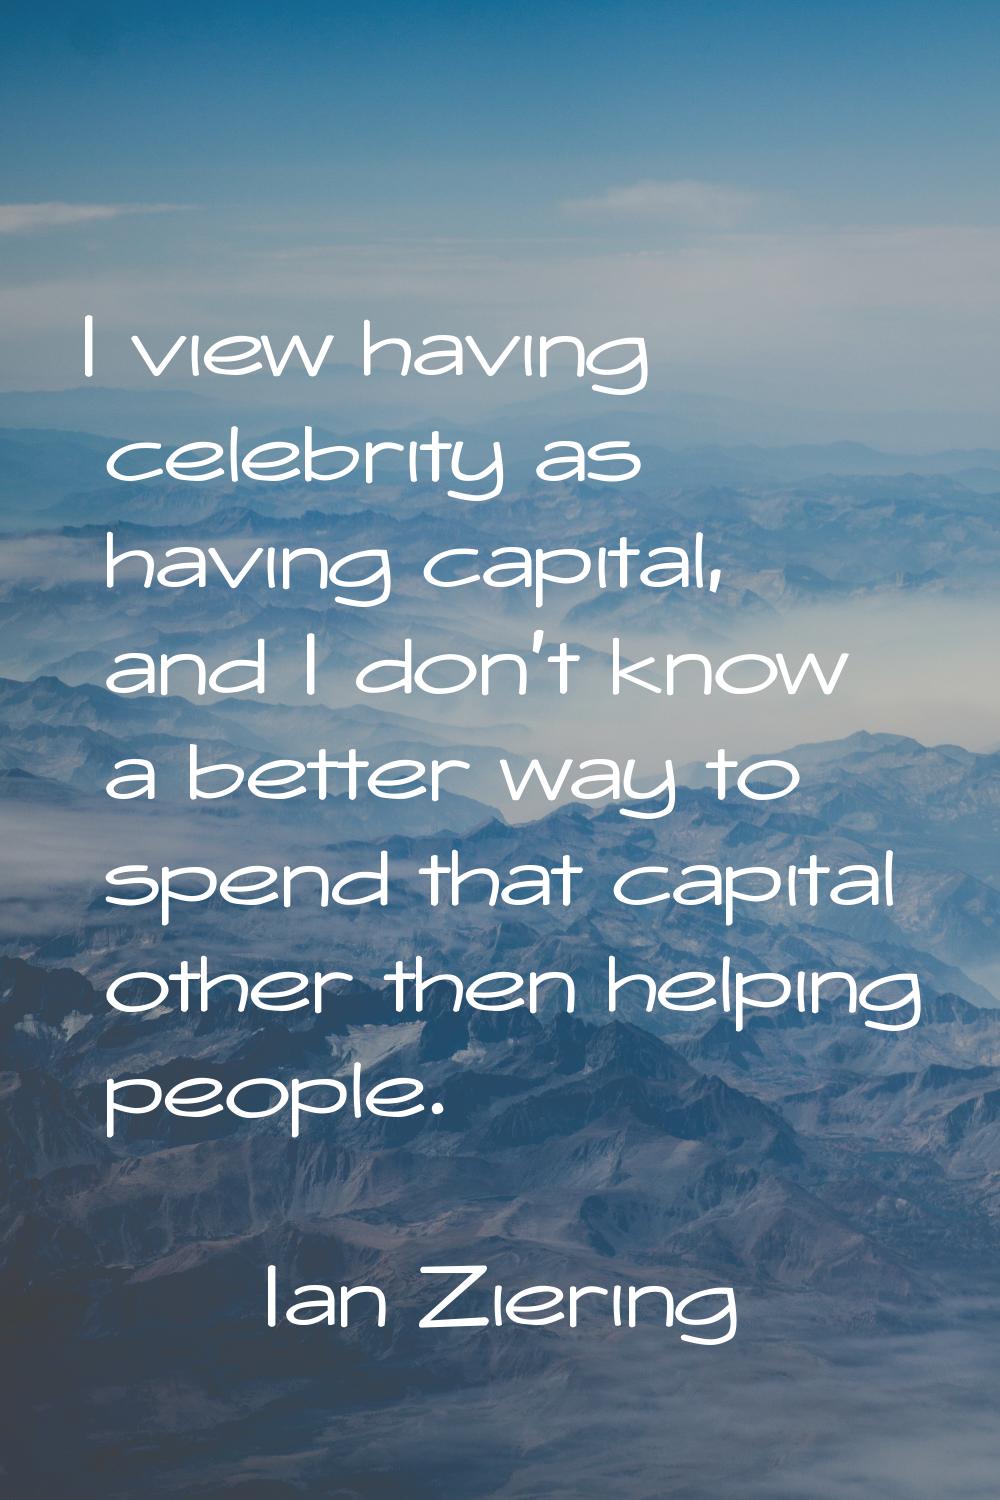 I view having celebrity as having capital, and I don't know a better way to spend that capital othe